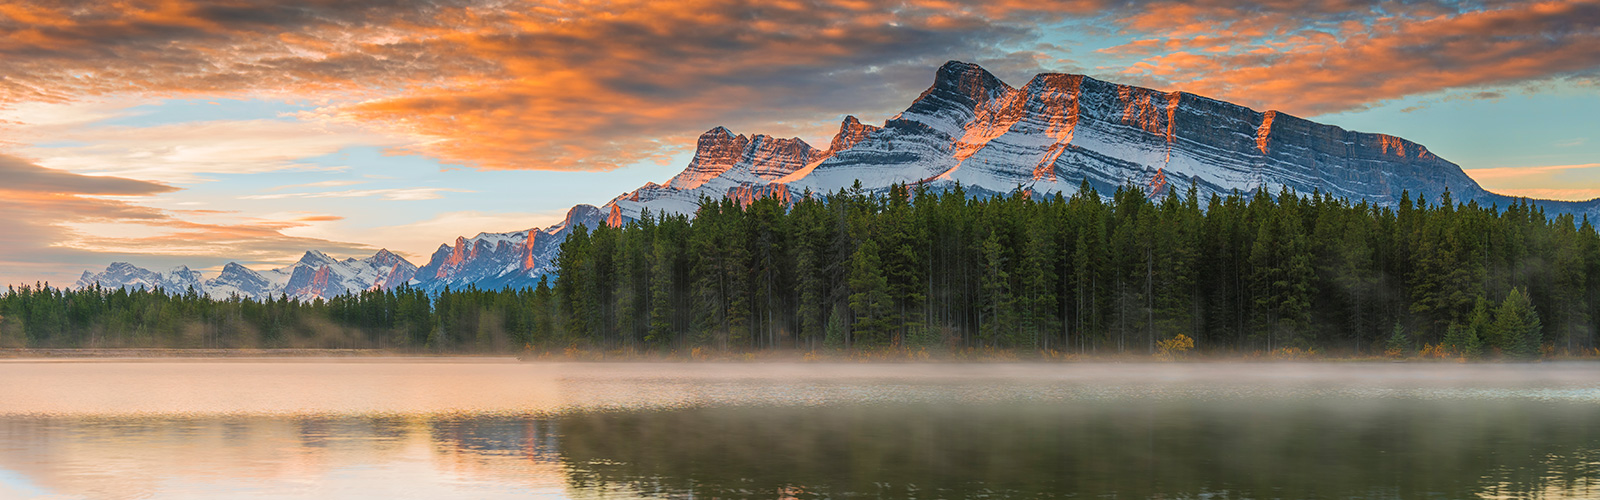 Mount Rundle at sunset in Banff National Park